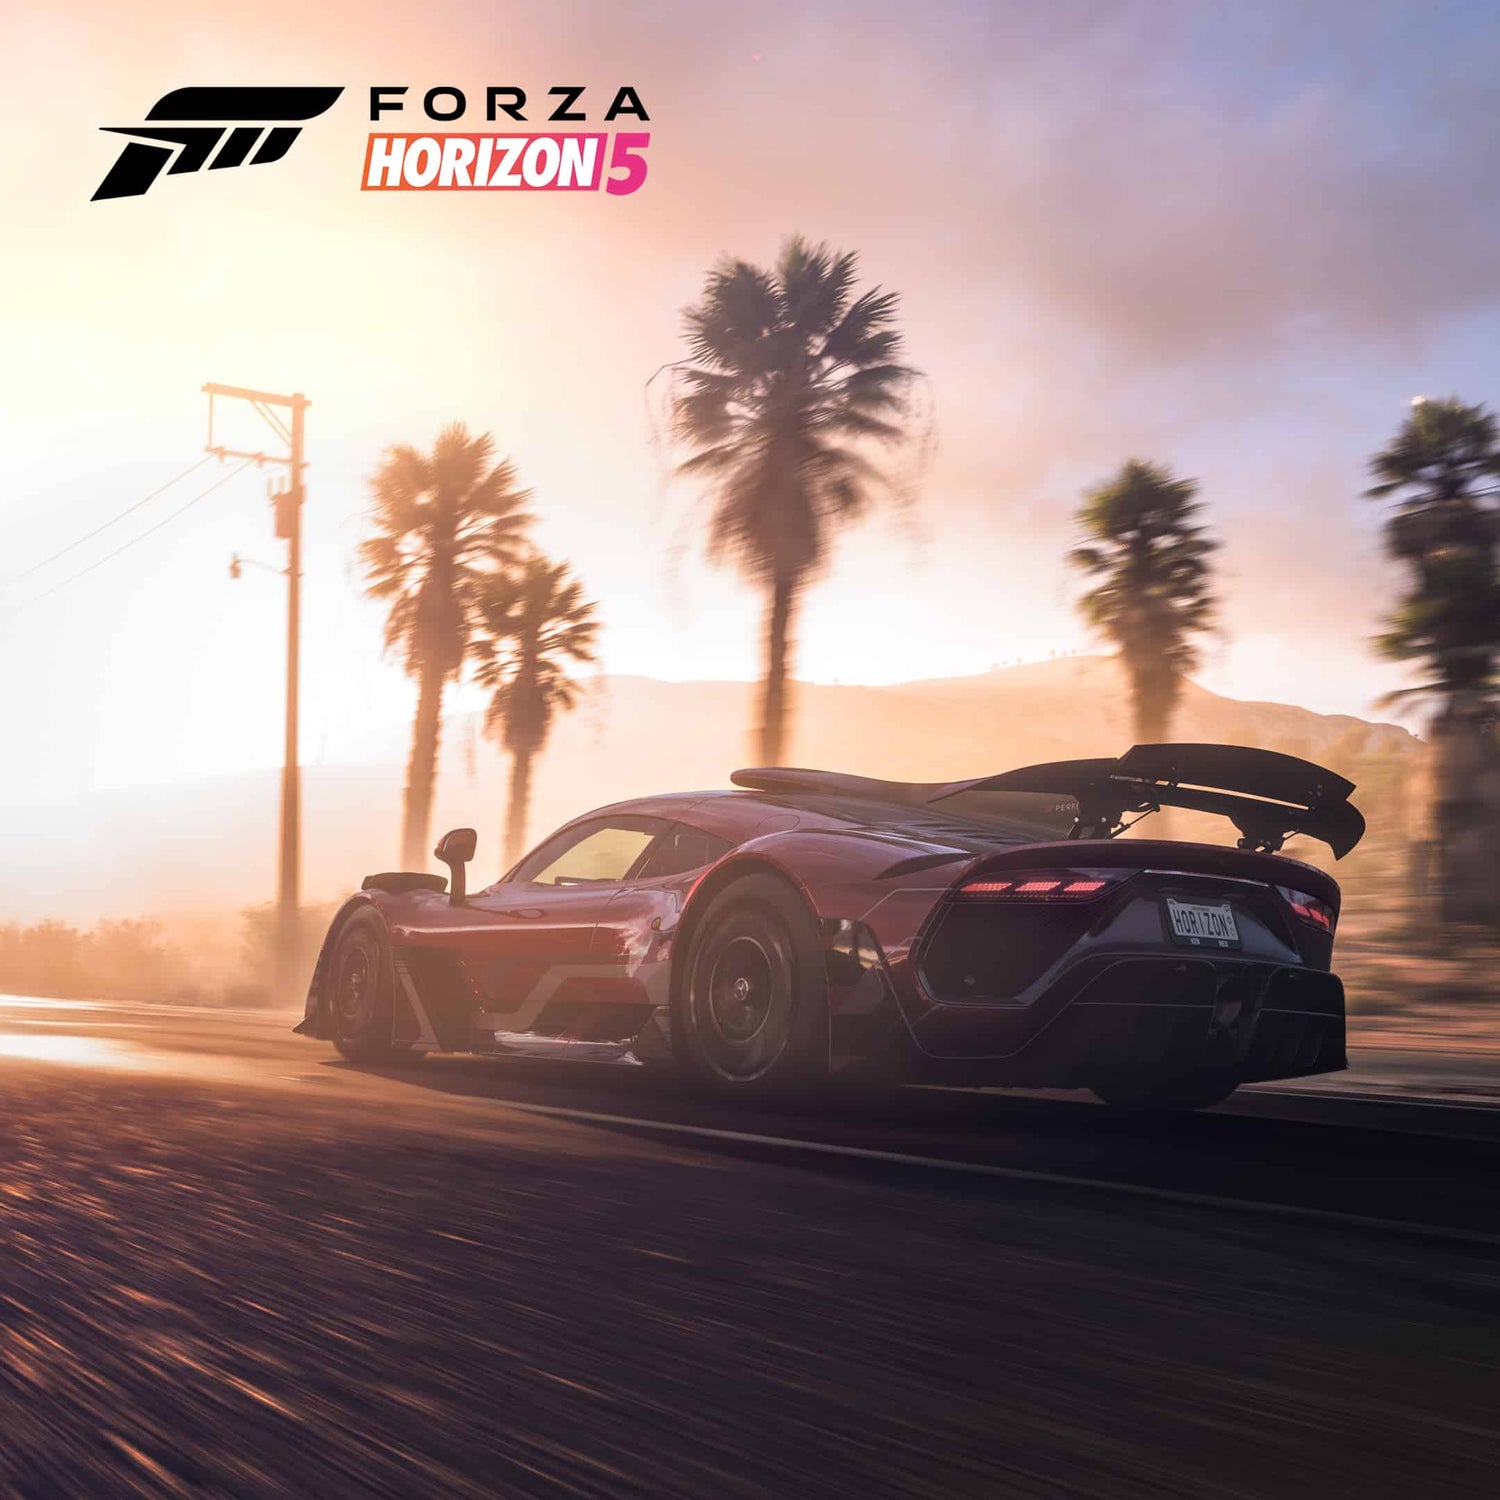 Forza Horizon 5 To Be Released On 9 November!